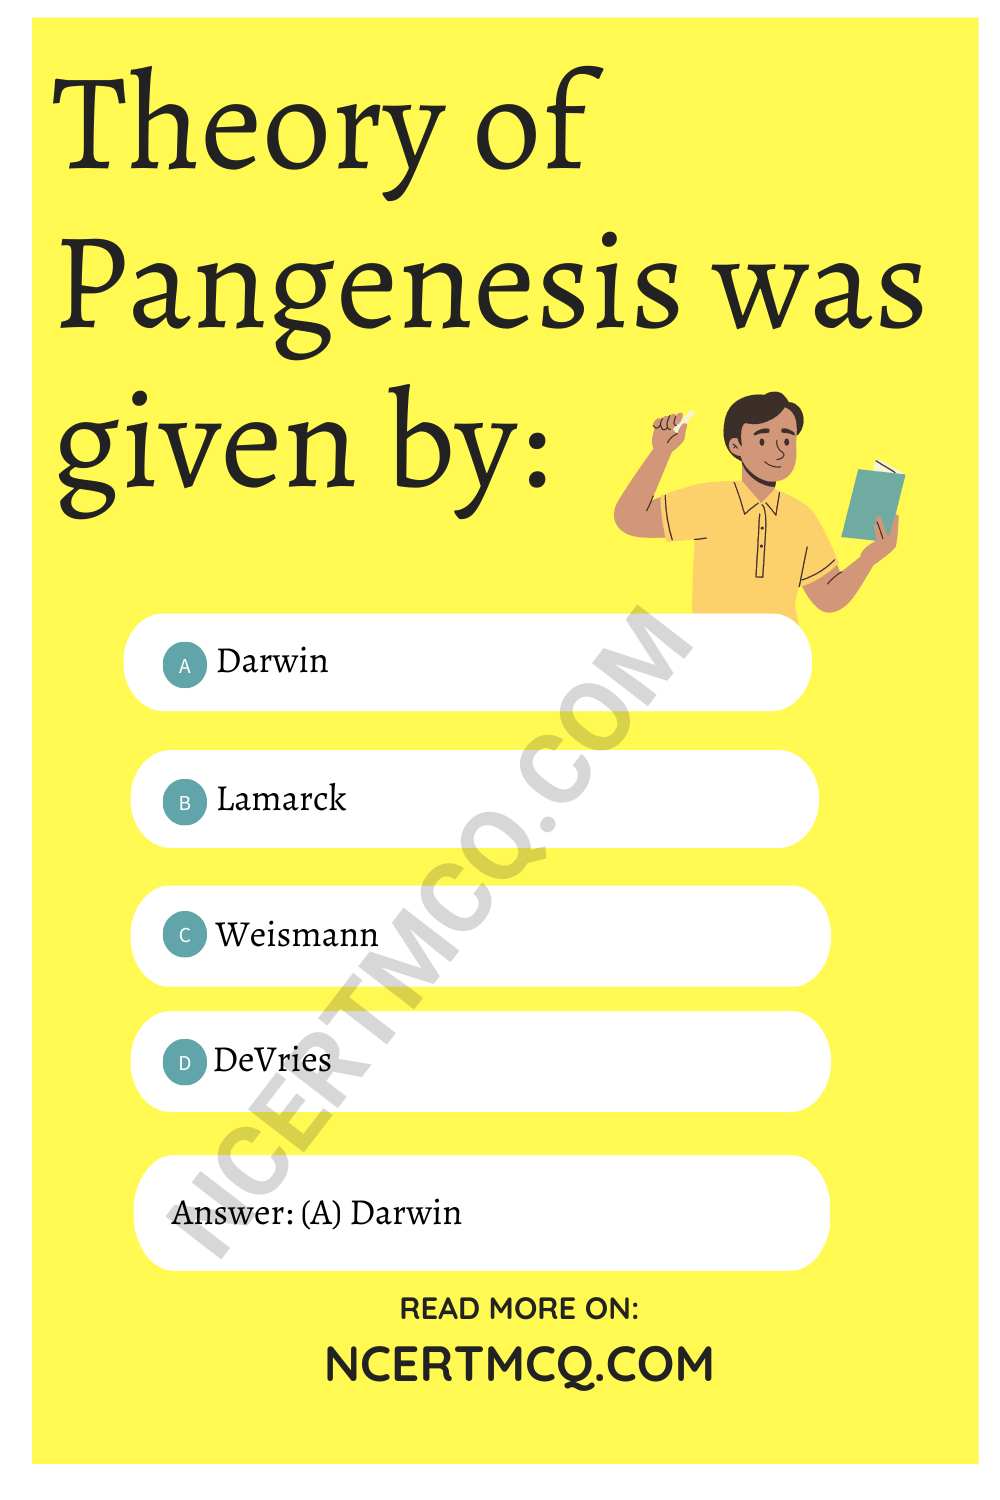 Theory of Pangenesis was given by: